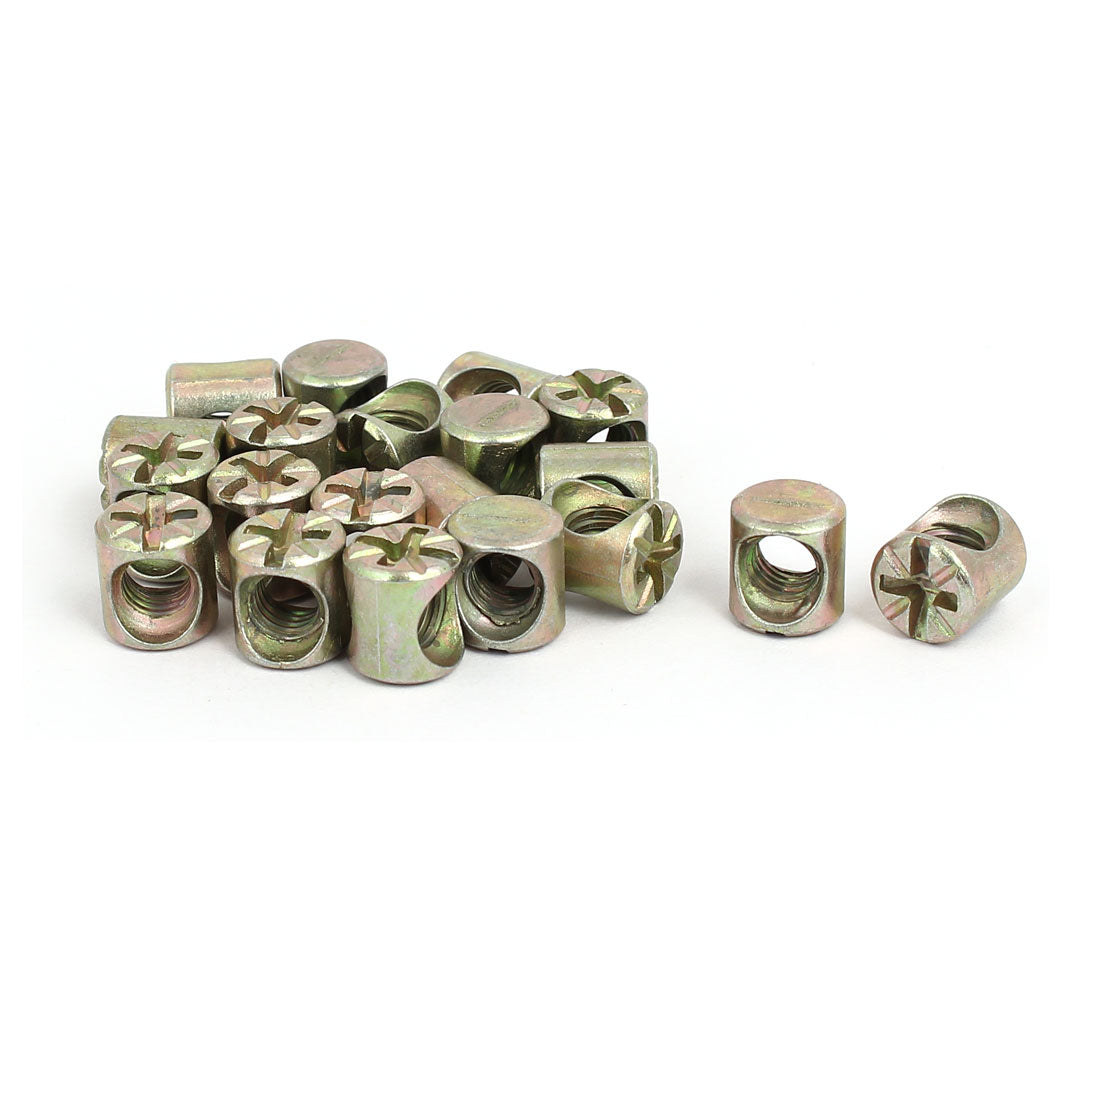 uxcell Uxcell M6 x 10mm Cross Dowel Slotted Metal Barrel Nuts 20PCS for Furniture Bed Chair